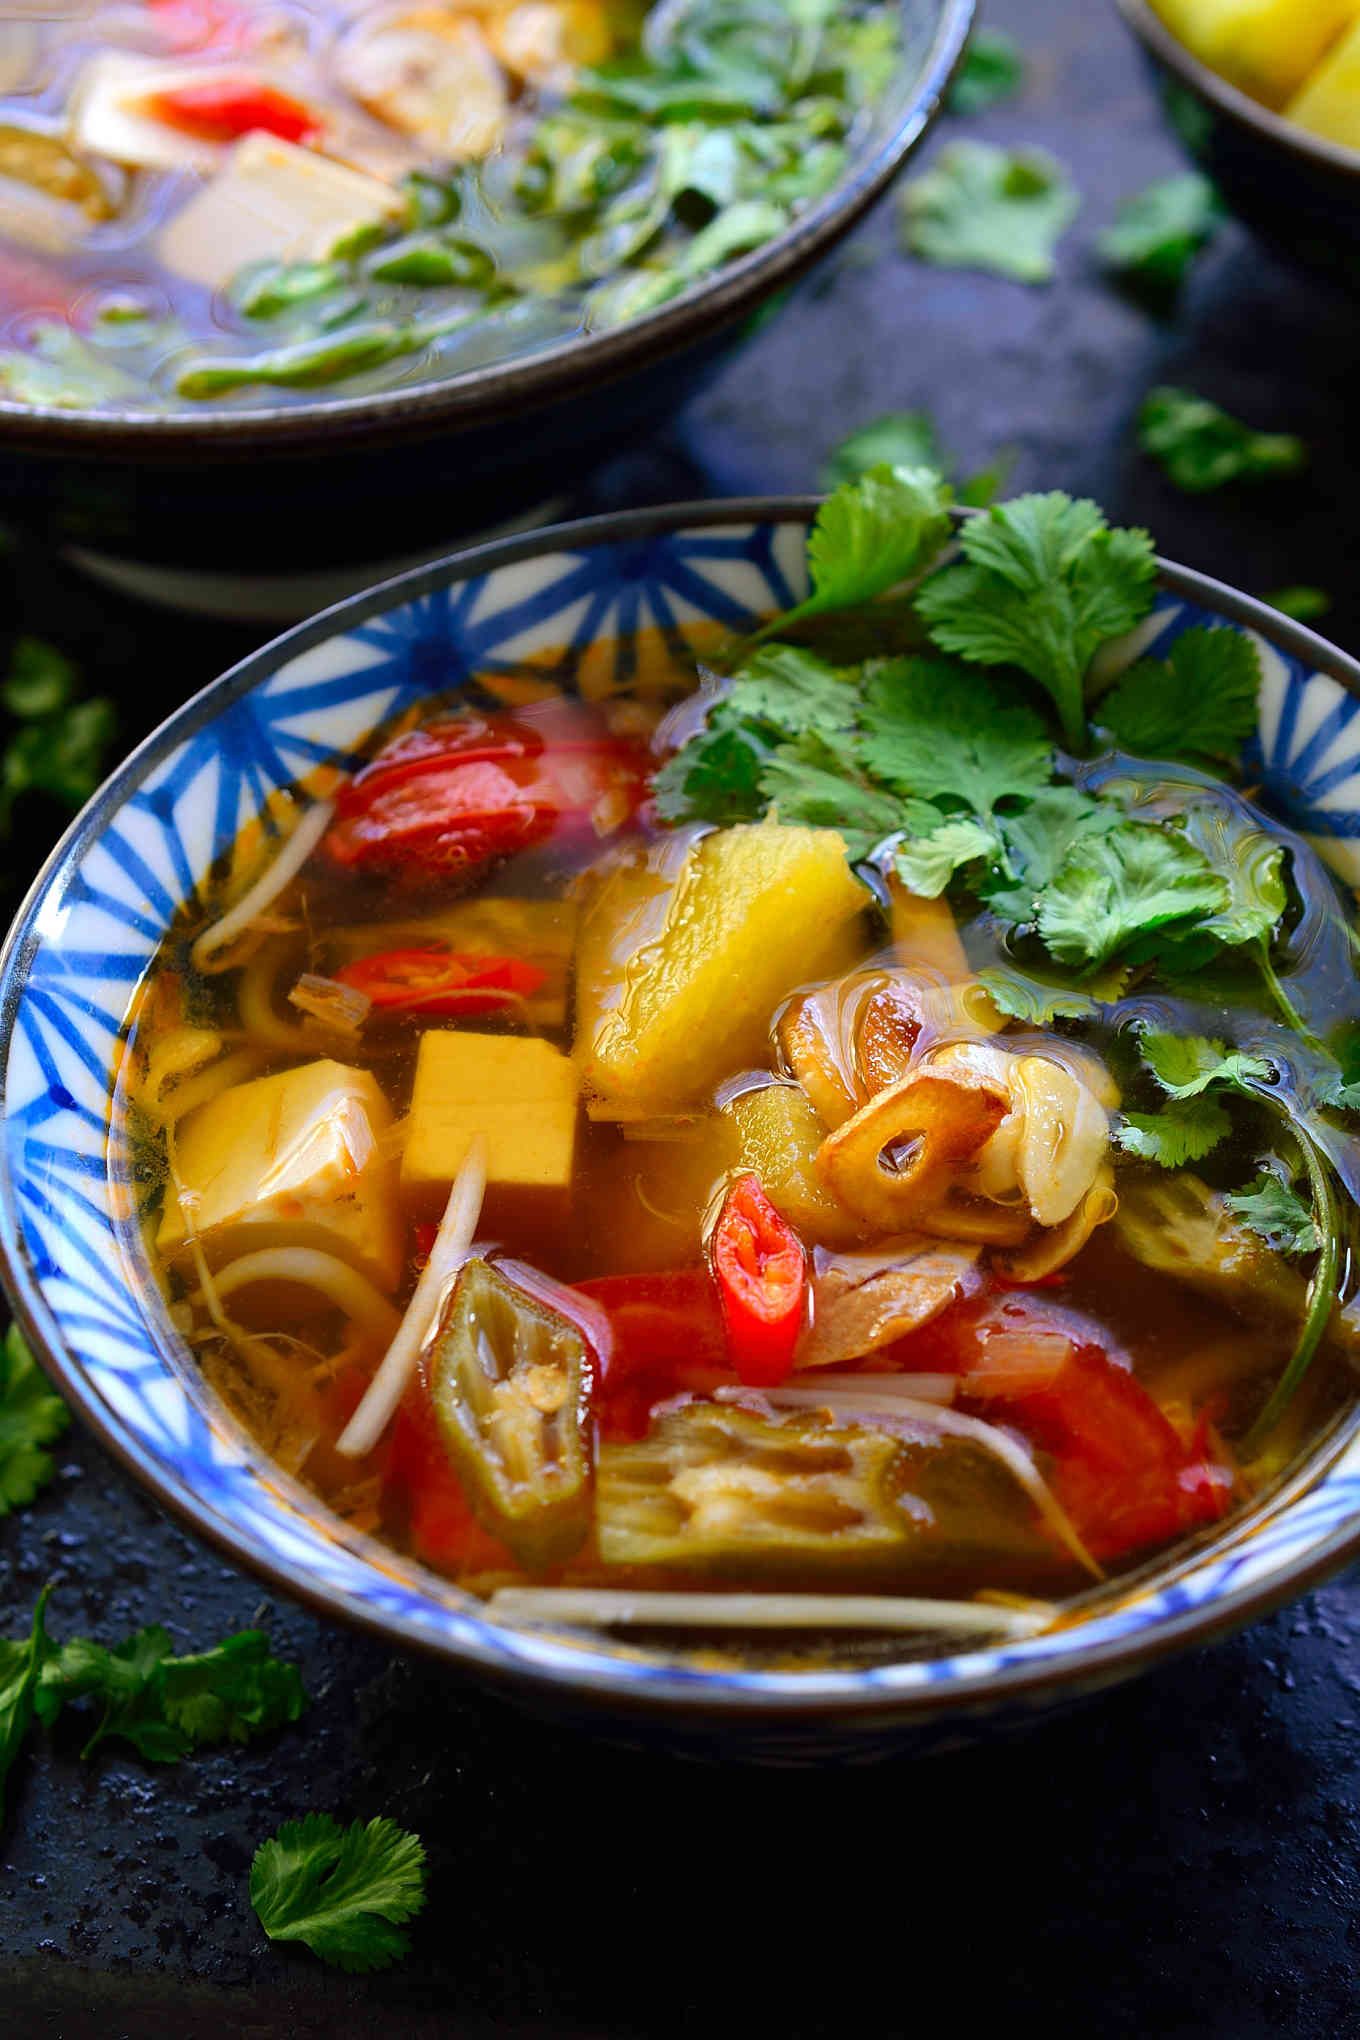 This Vietnamese sour soup recipe is ready in just 15 minutes and so full of complex flavours and textures that it just might be the most delicious bowl of soup youâve ever tasted. This is a vegetarian version of canh chua with tamarind, pineapple, okra and silken tofu. The combination seems weird but Iâm sure it will quickly become your new favourite soup!